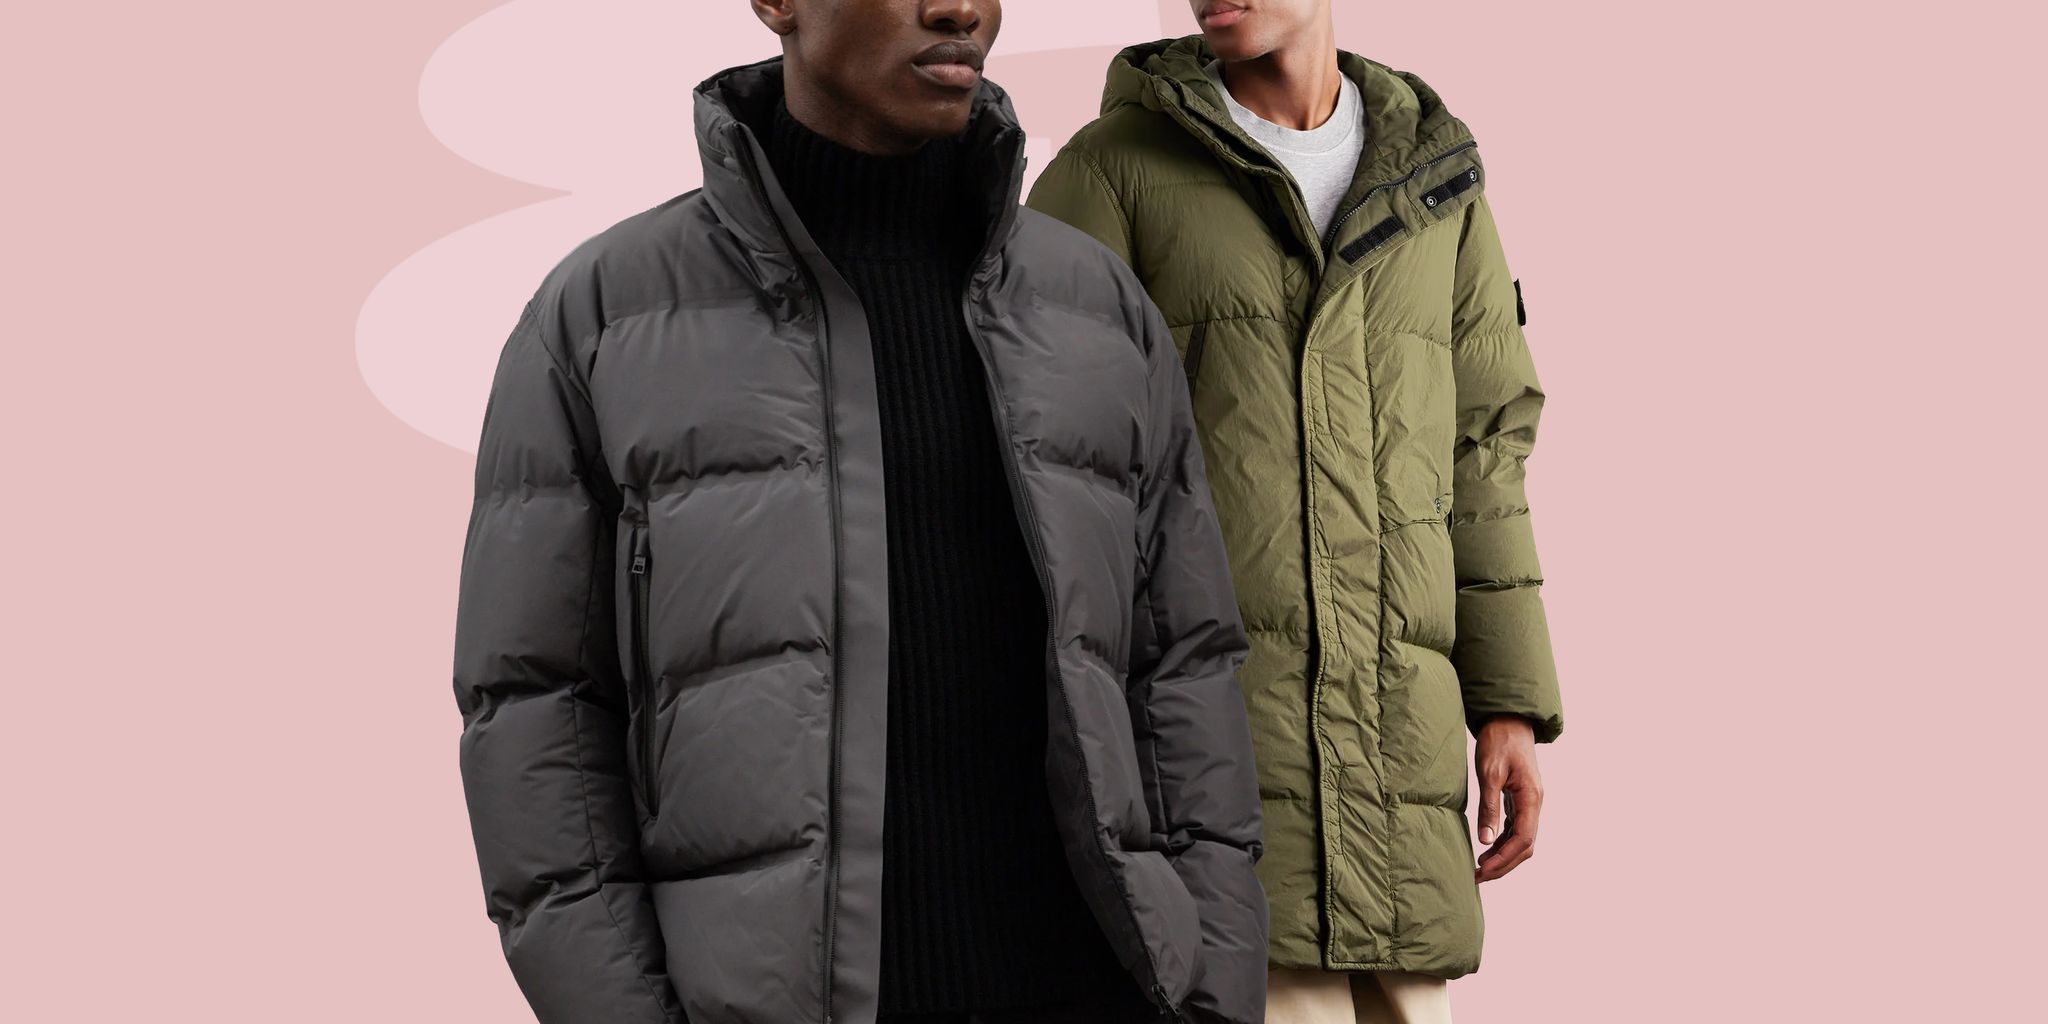 Light padded jacket with 40% discount!